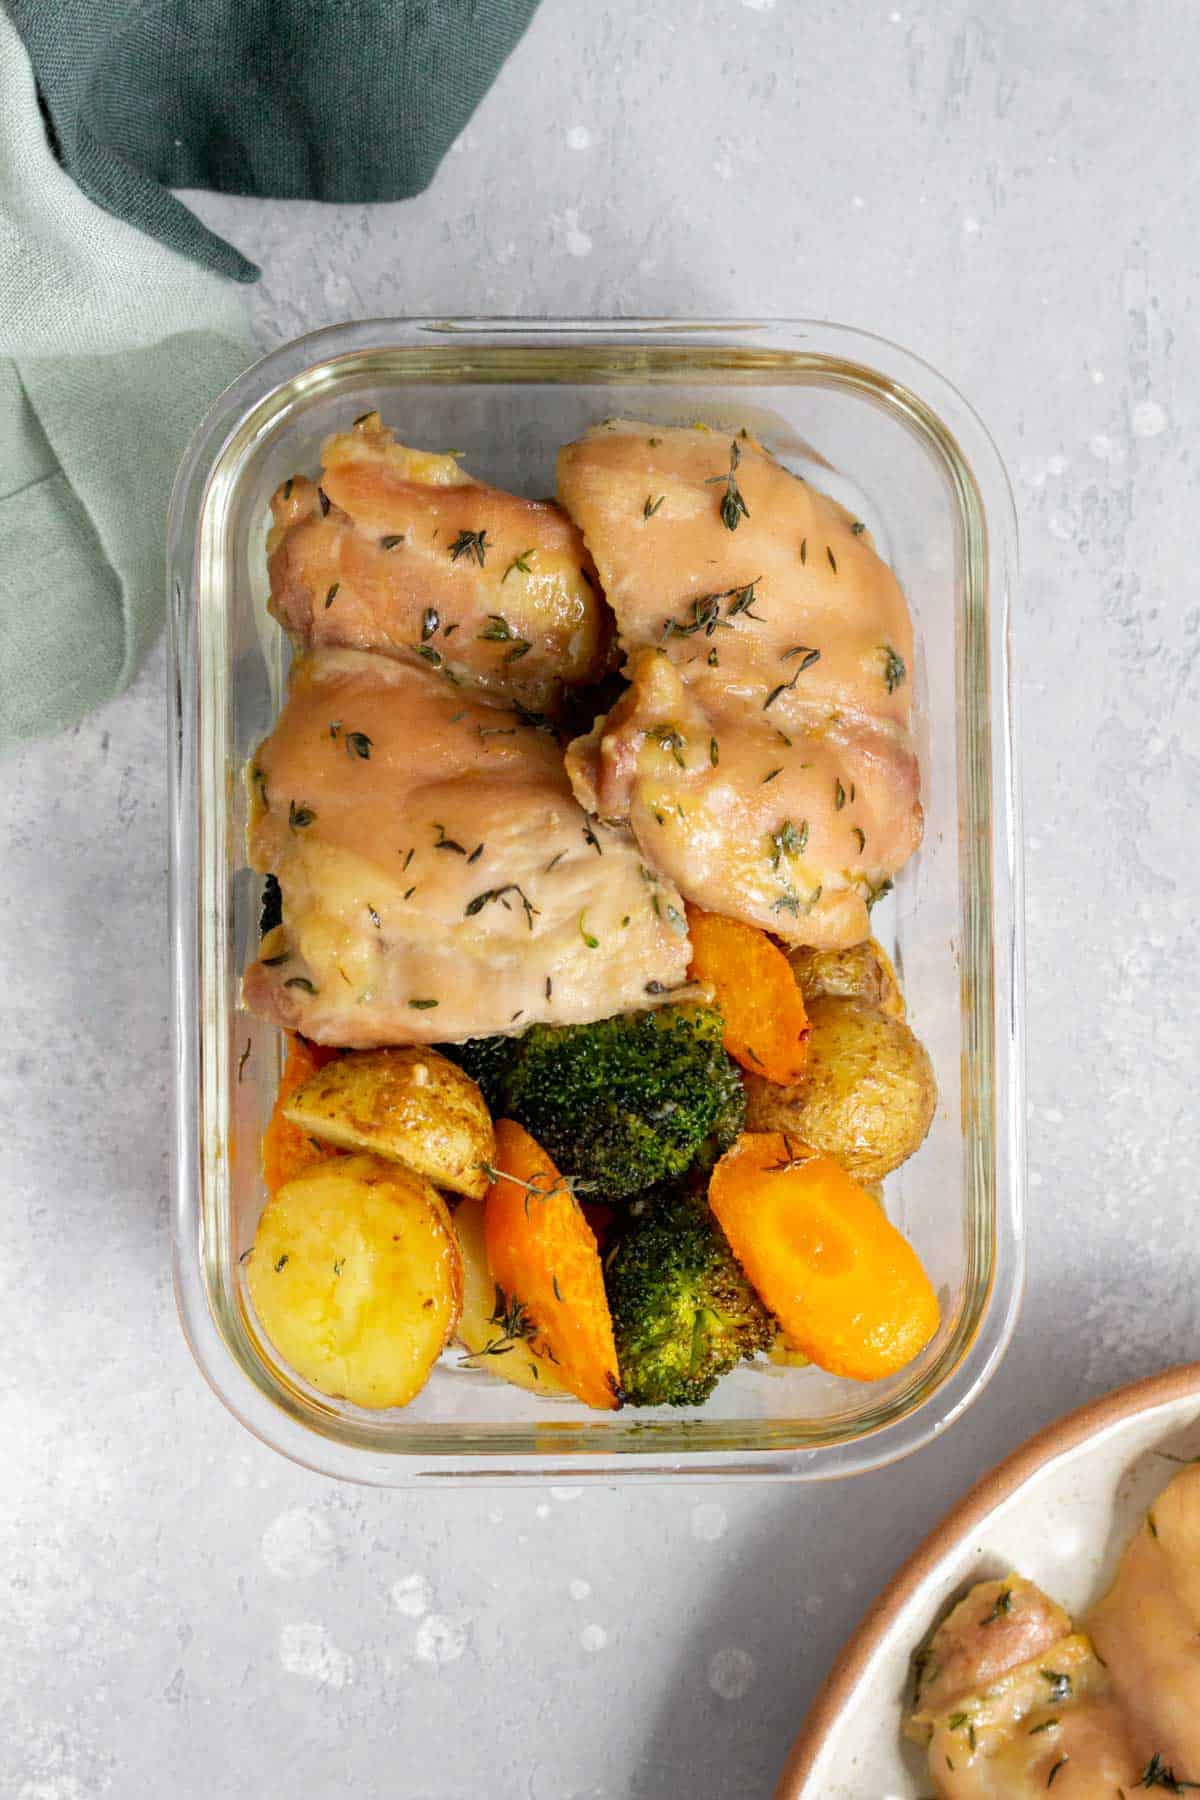 A meal prep container with chicken thighs with a side of broccoli, carrots, and potatoes.